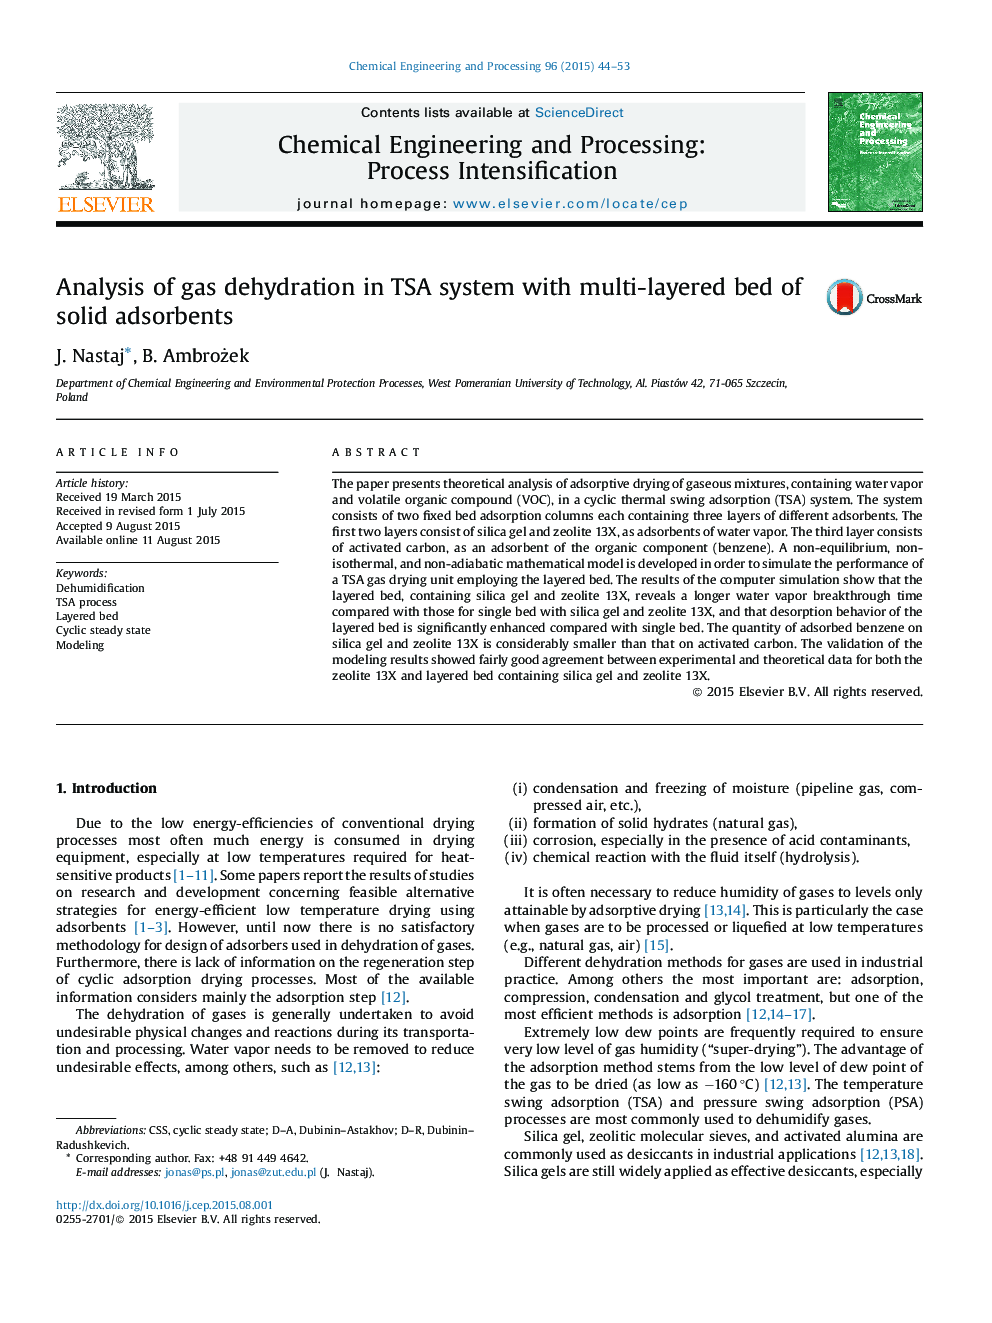 Analysis of gas dehydration in TSA system with multi-layered bed of solid adsorbents